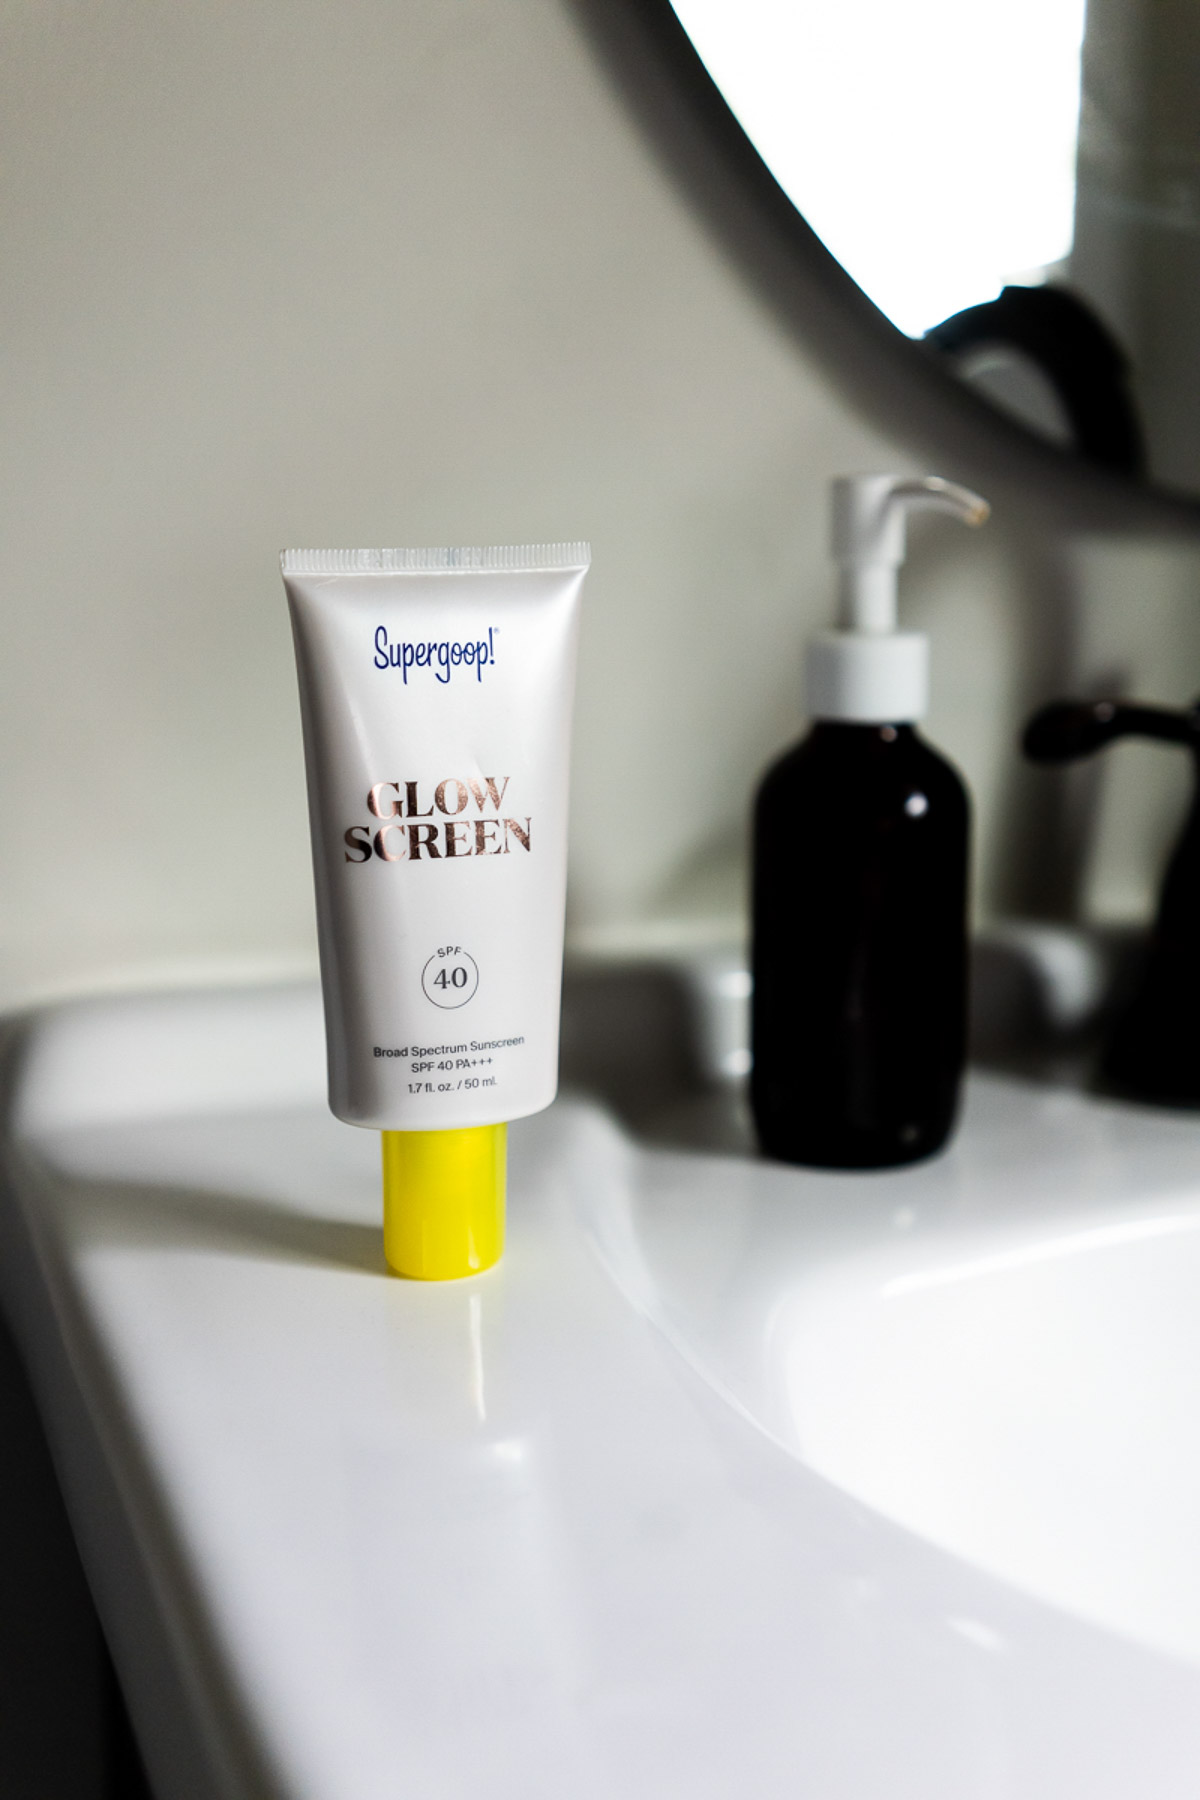 Supergood Sunscreen on Sink Counter - Clean beauty at Nordstrom Anniversary Sale